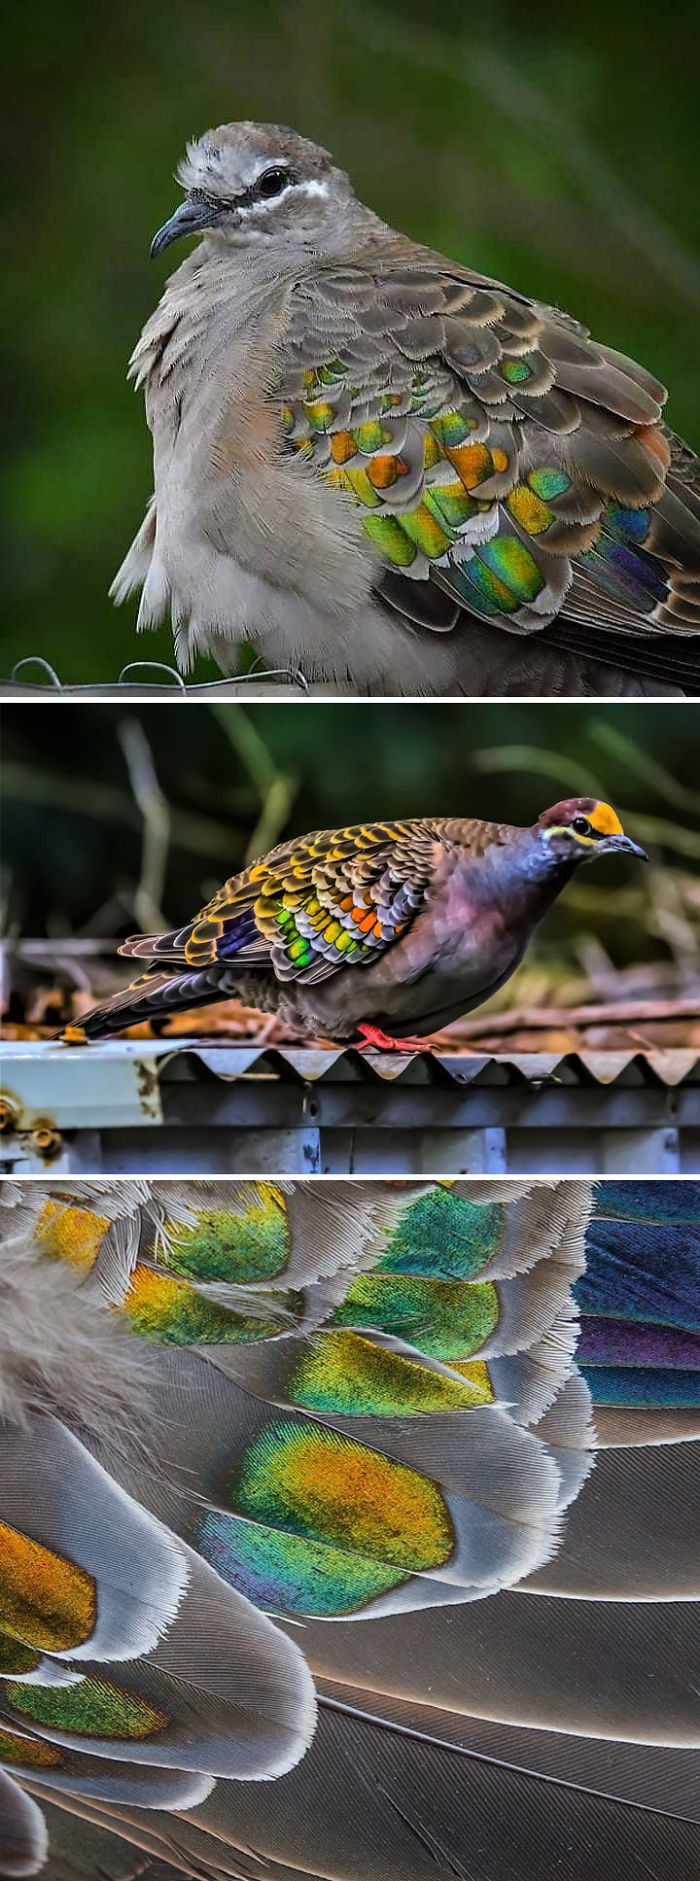 Mesmerizing! Check Out These 34 Gorgeously Plumed Pigeon Breeds